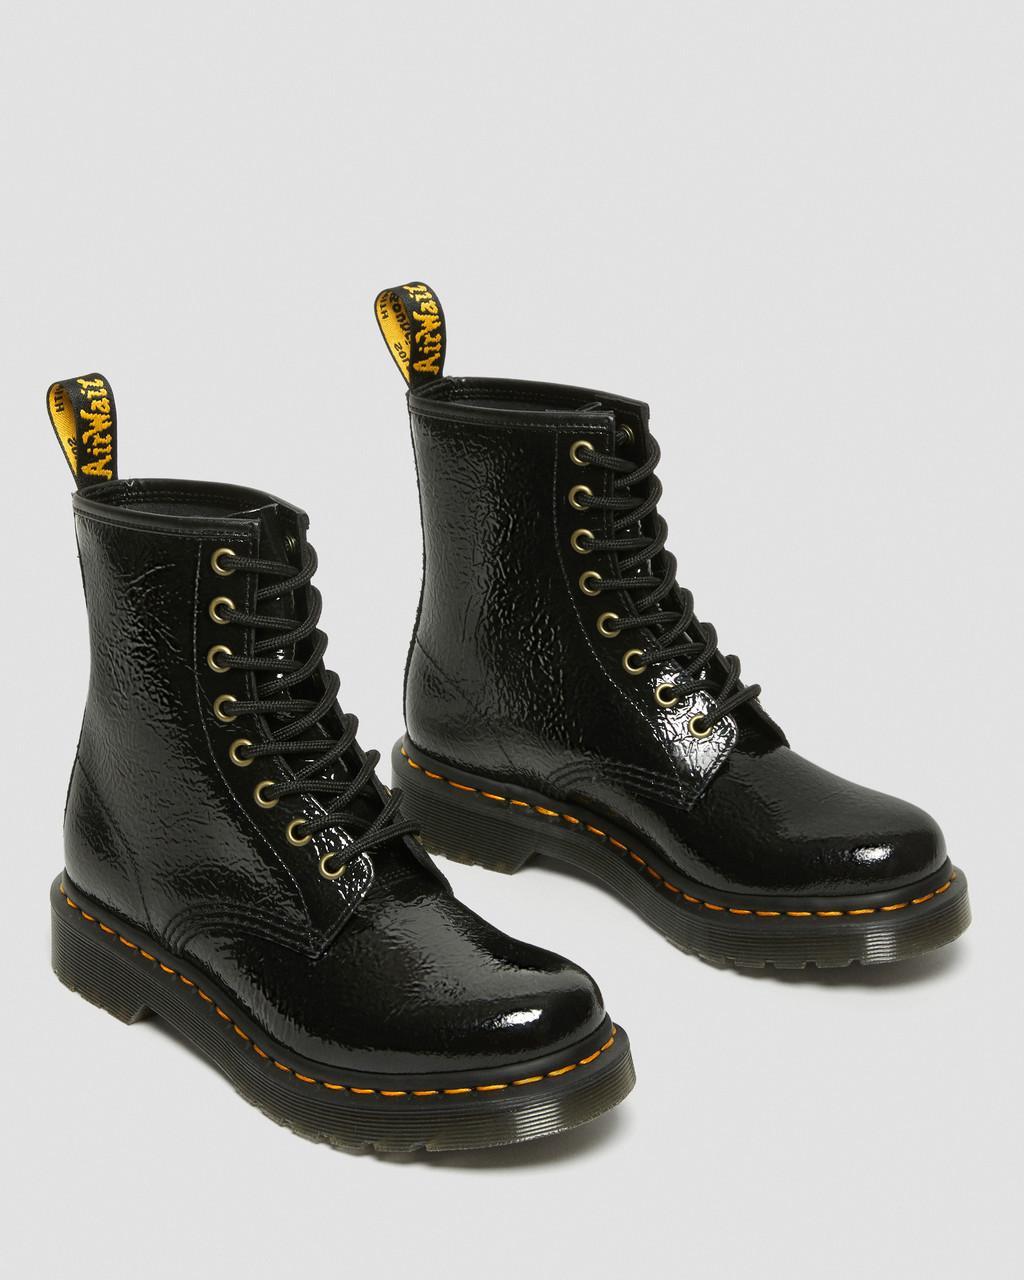 Dr. Martens 1460 Women's Distressed Patent Leather Boots in Black | Lyst